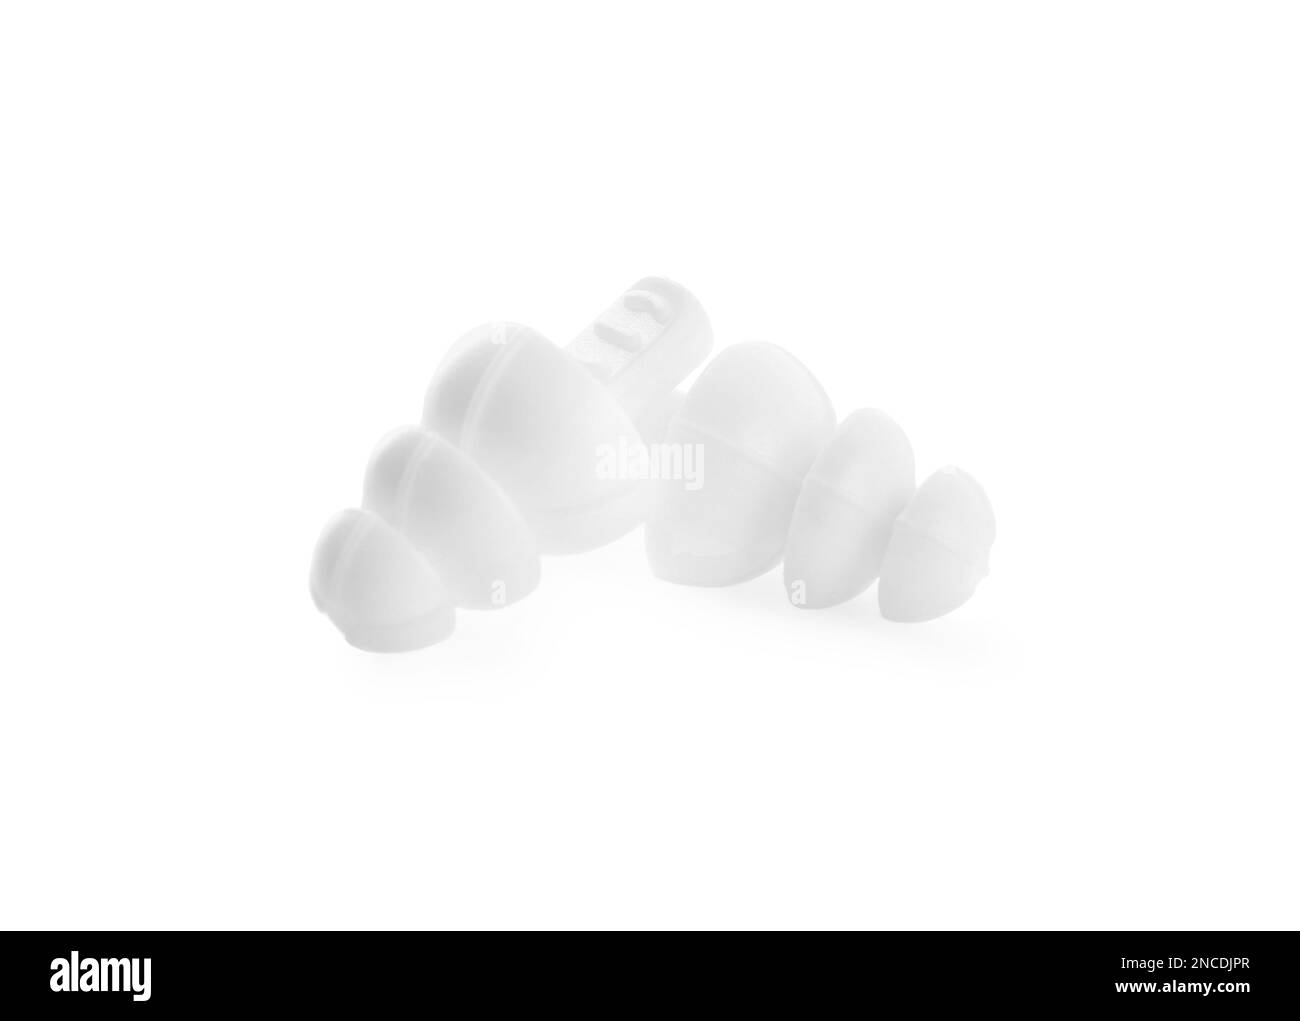 Pair of ear plugs isolated on white Stock Photo